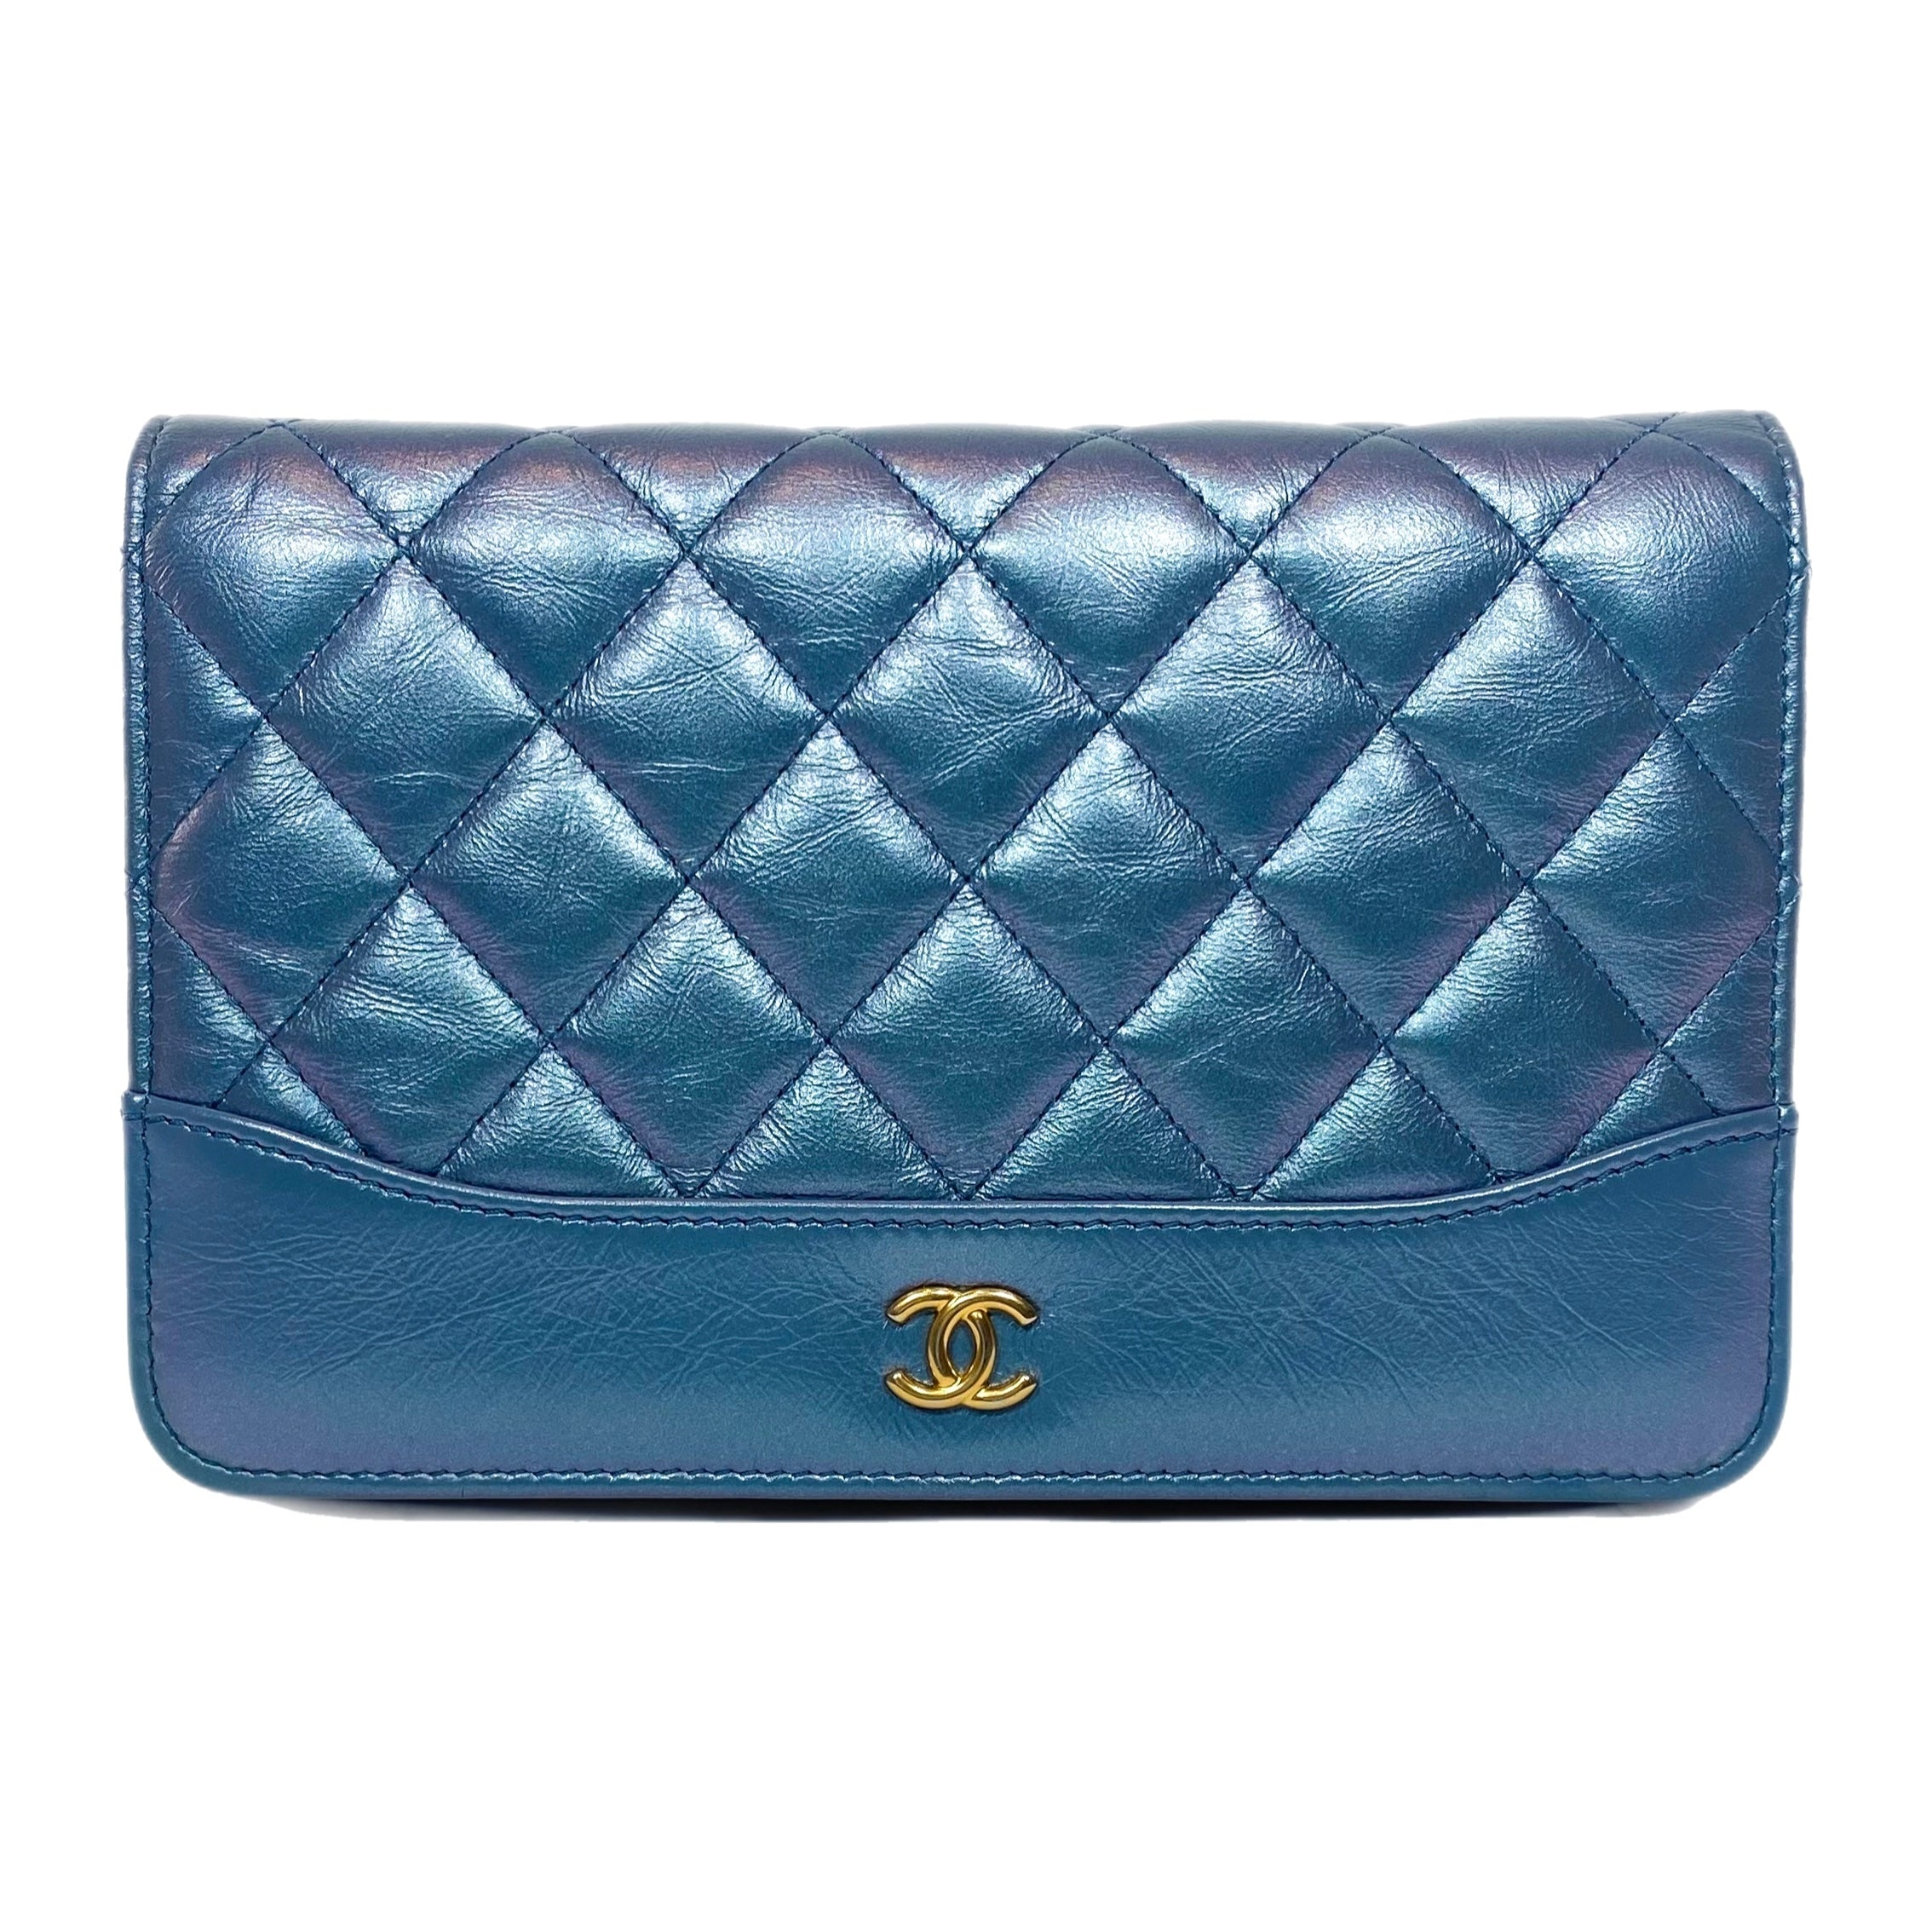 Chanel Iridescent Blue Quilted Calfskin Wallet On Chain